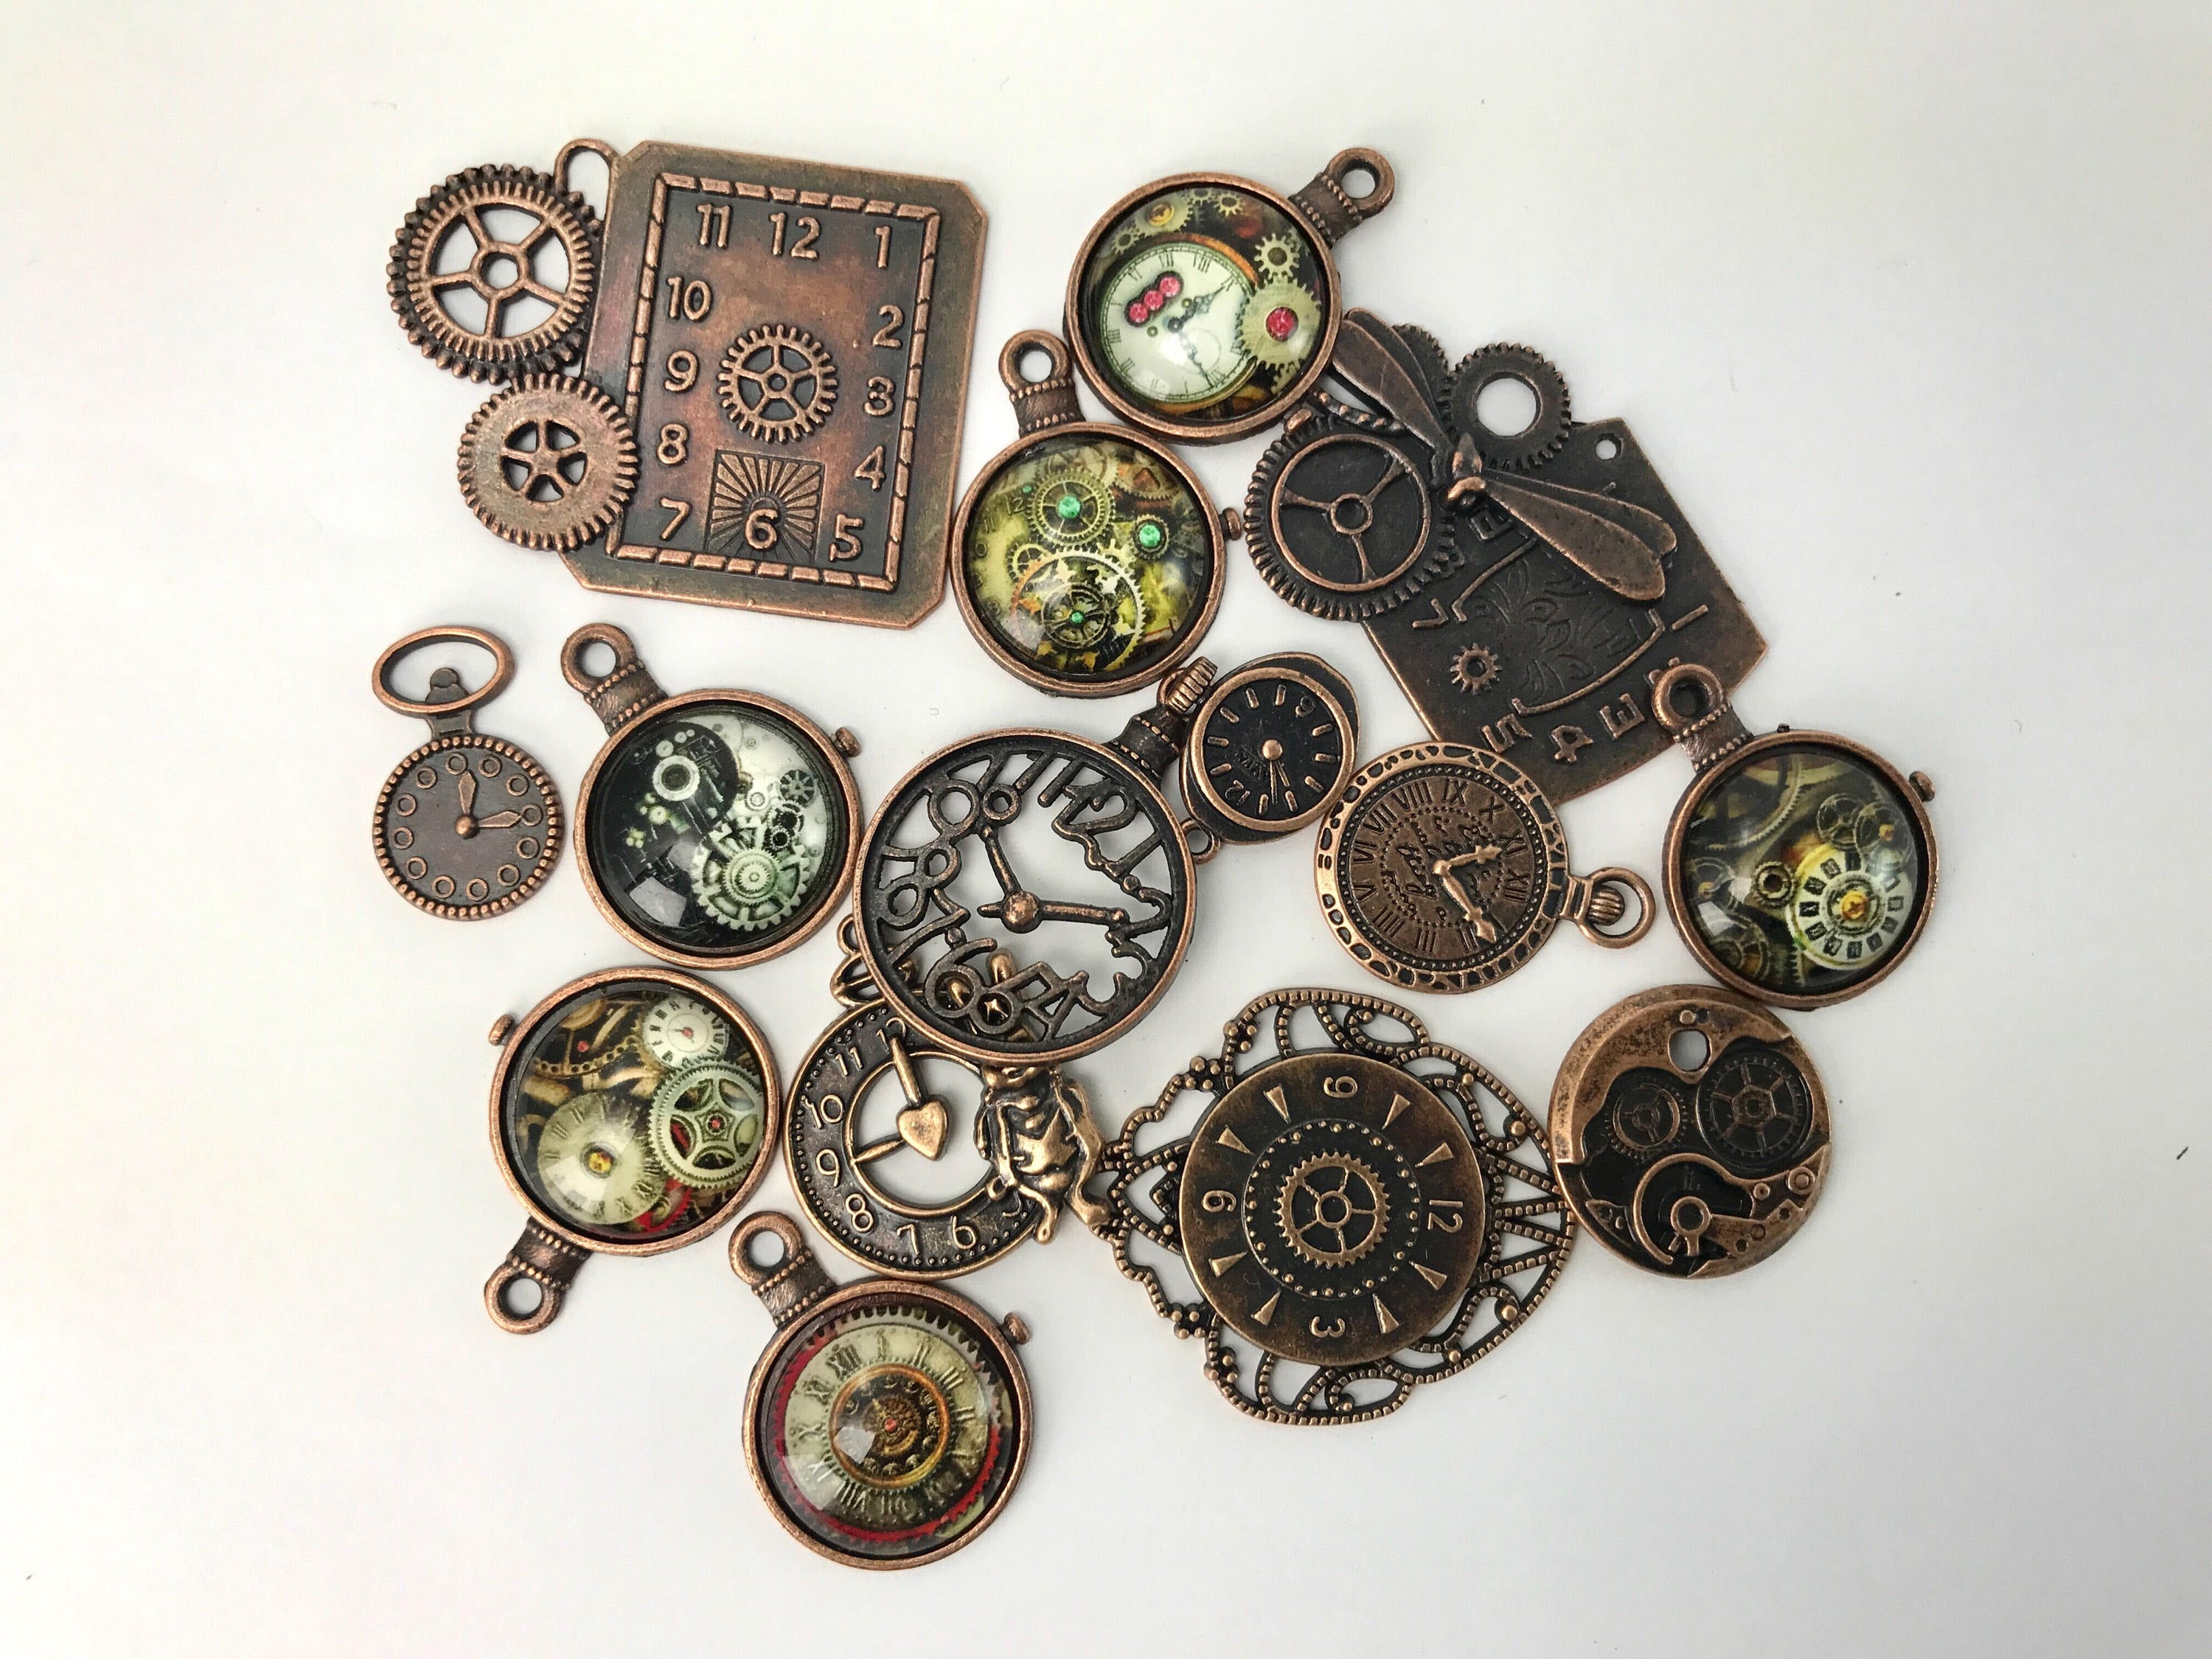 15 Pcs Mixed Charms - Vintage Clocks in Red Copper